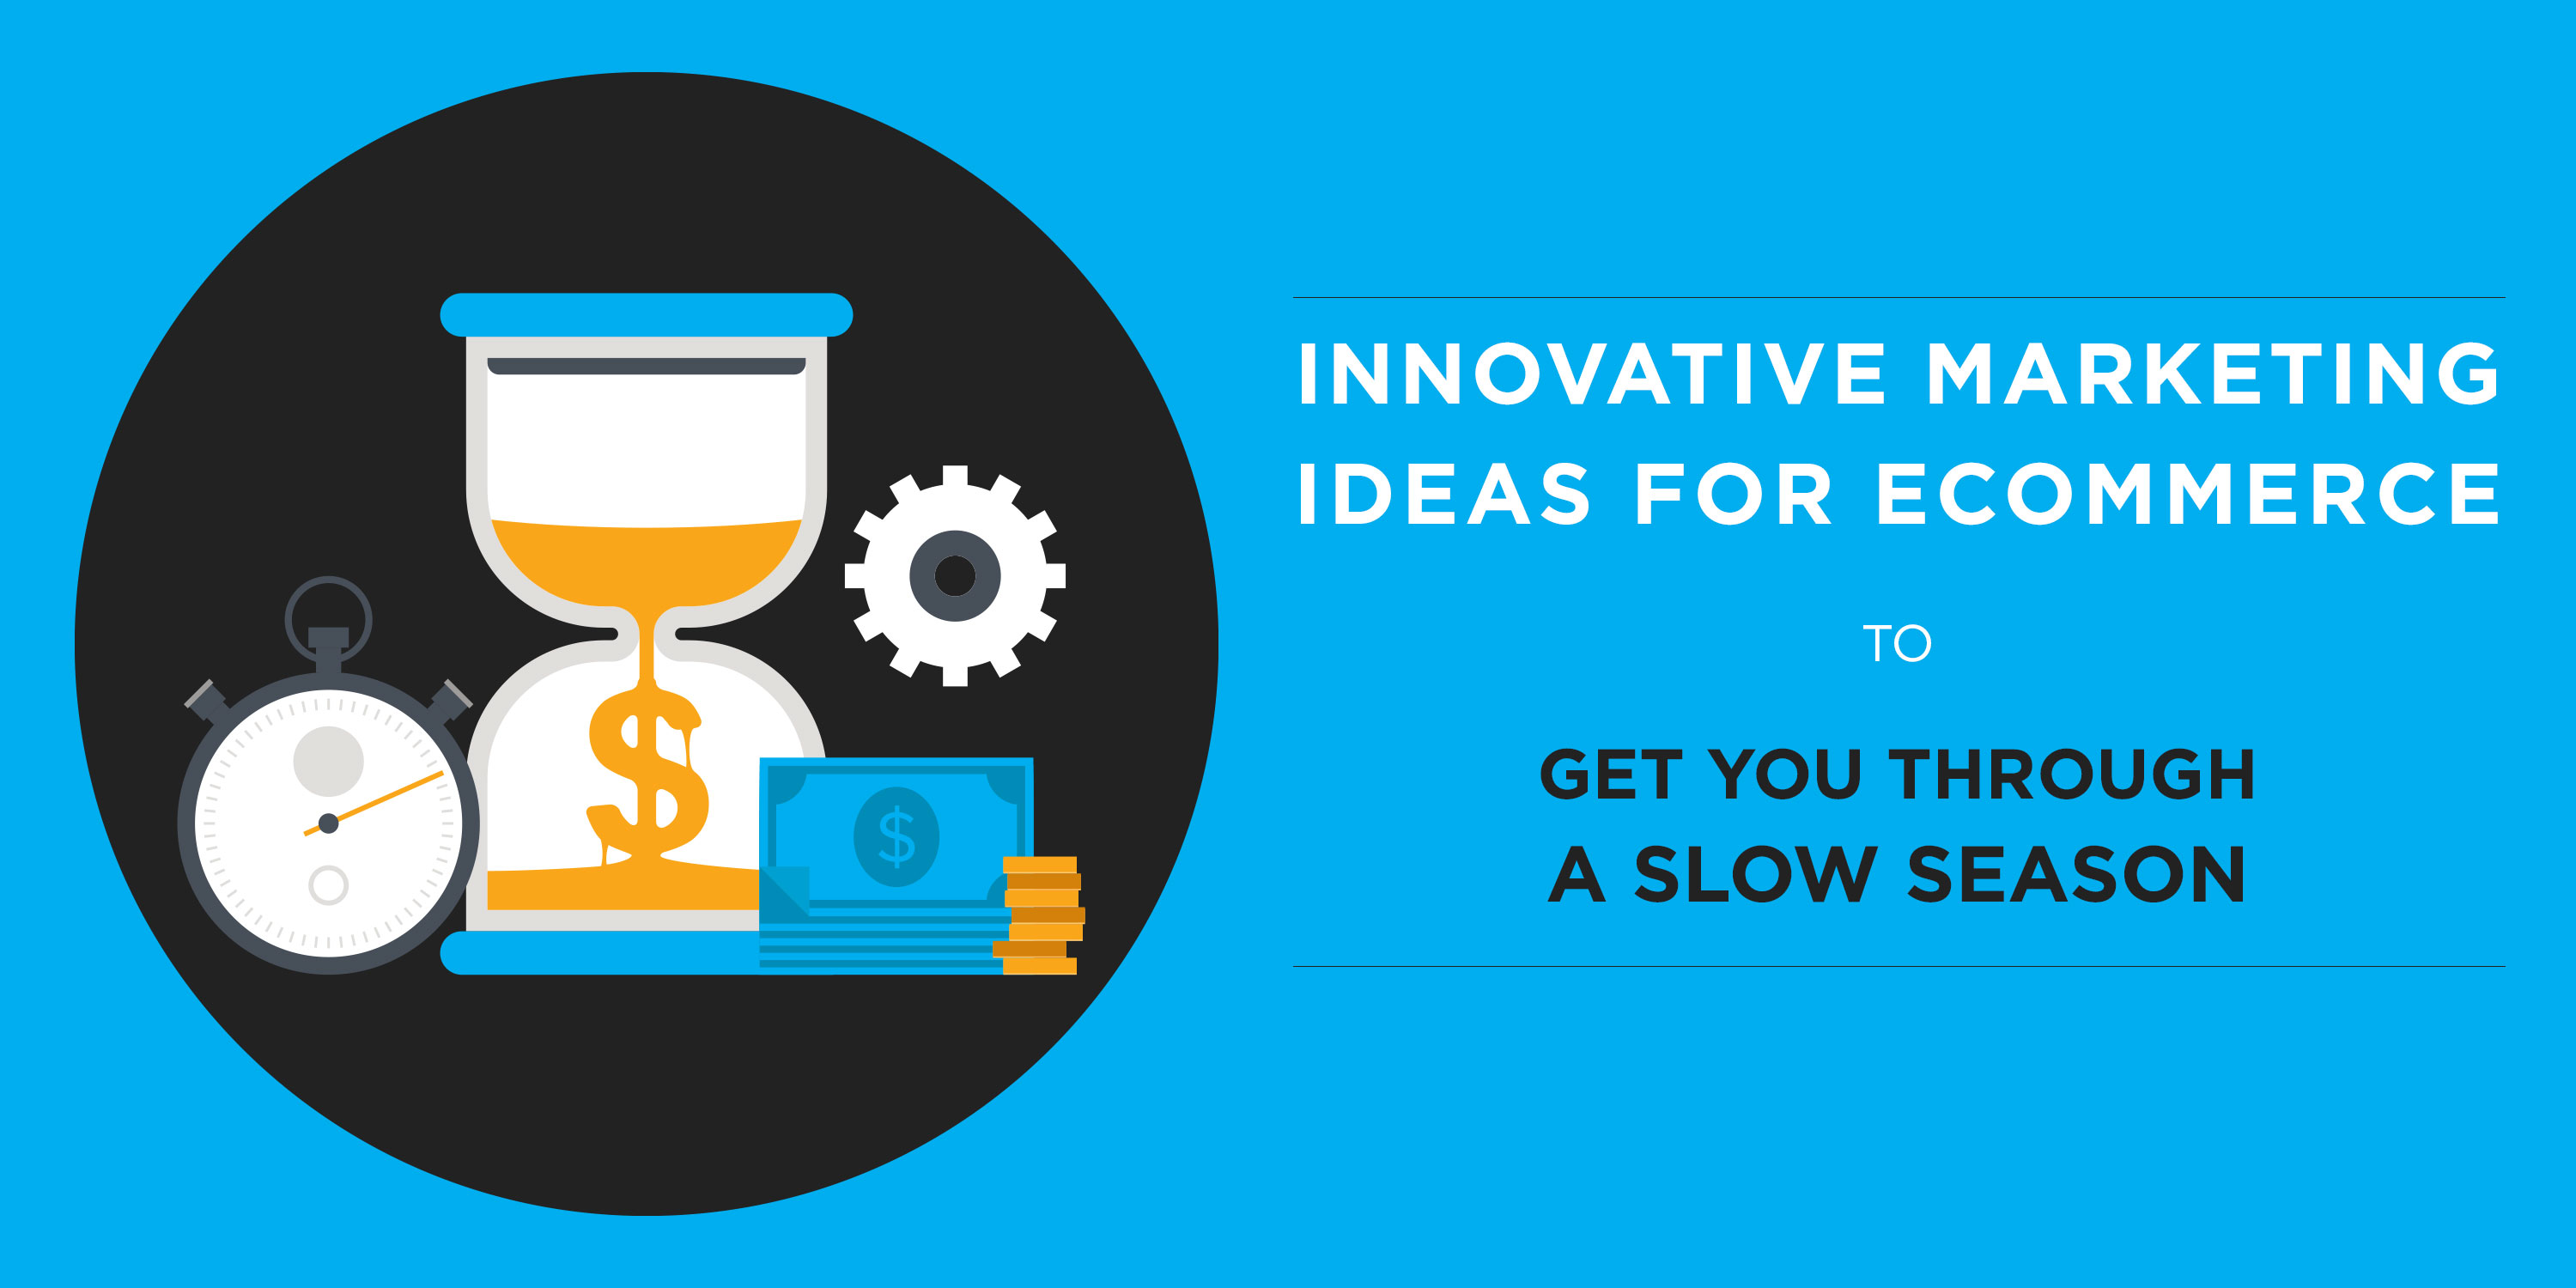 Innovative Marketing Ideas for eCommerce To Get You Through A Slow Season